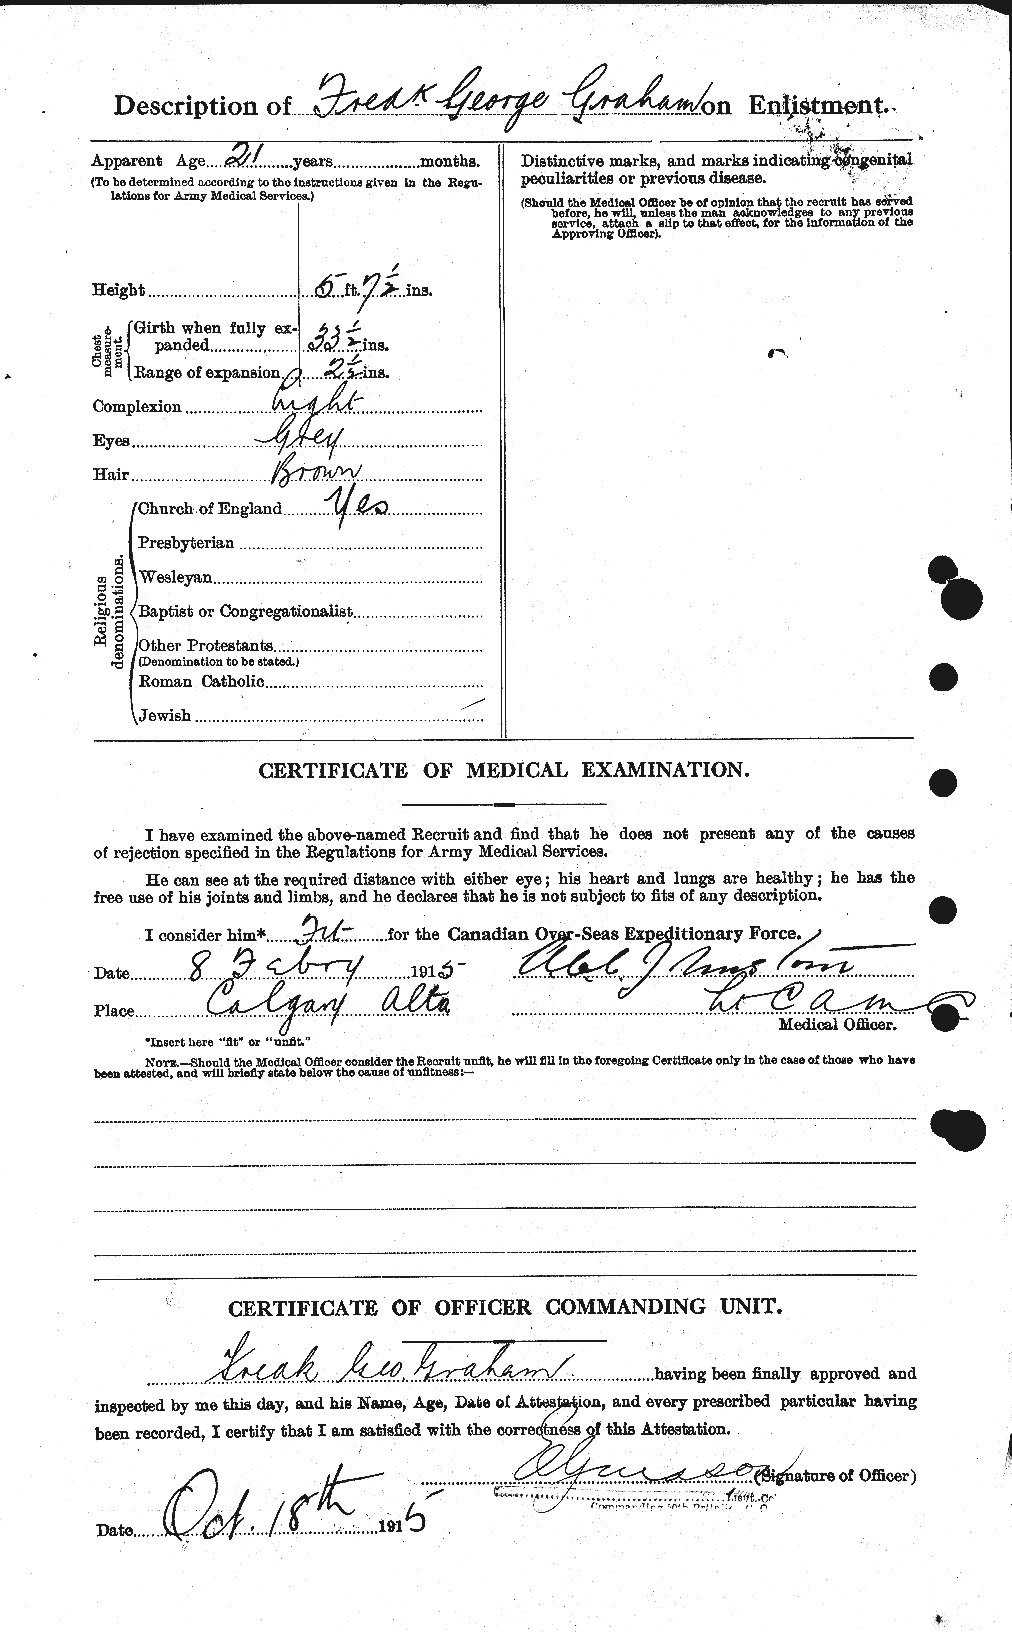 Personnel Records of the First World War - CEF 357600b